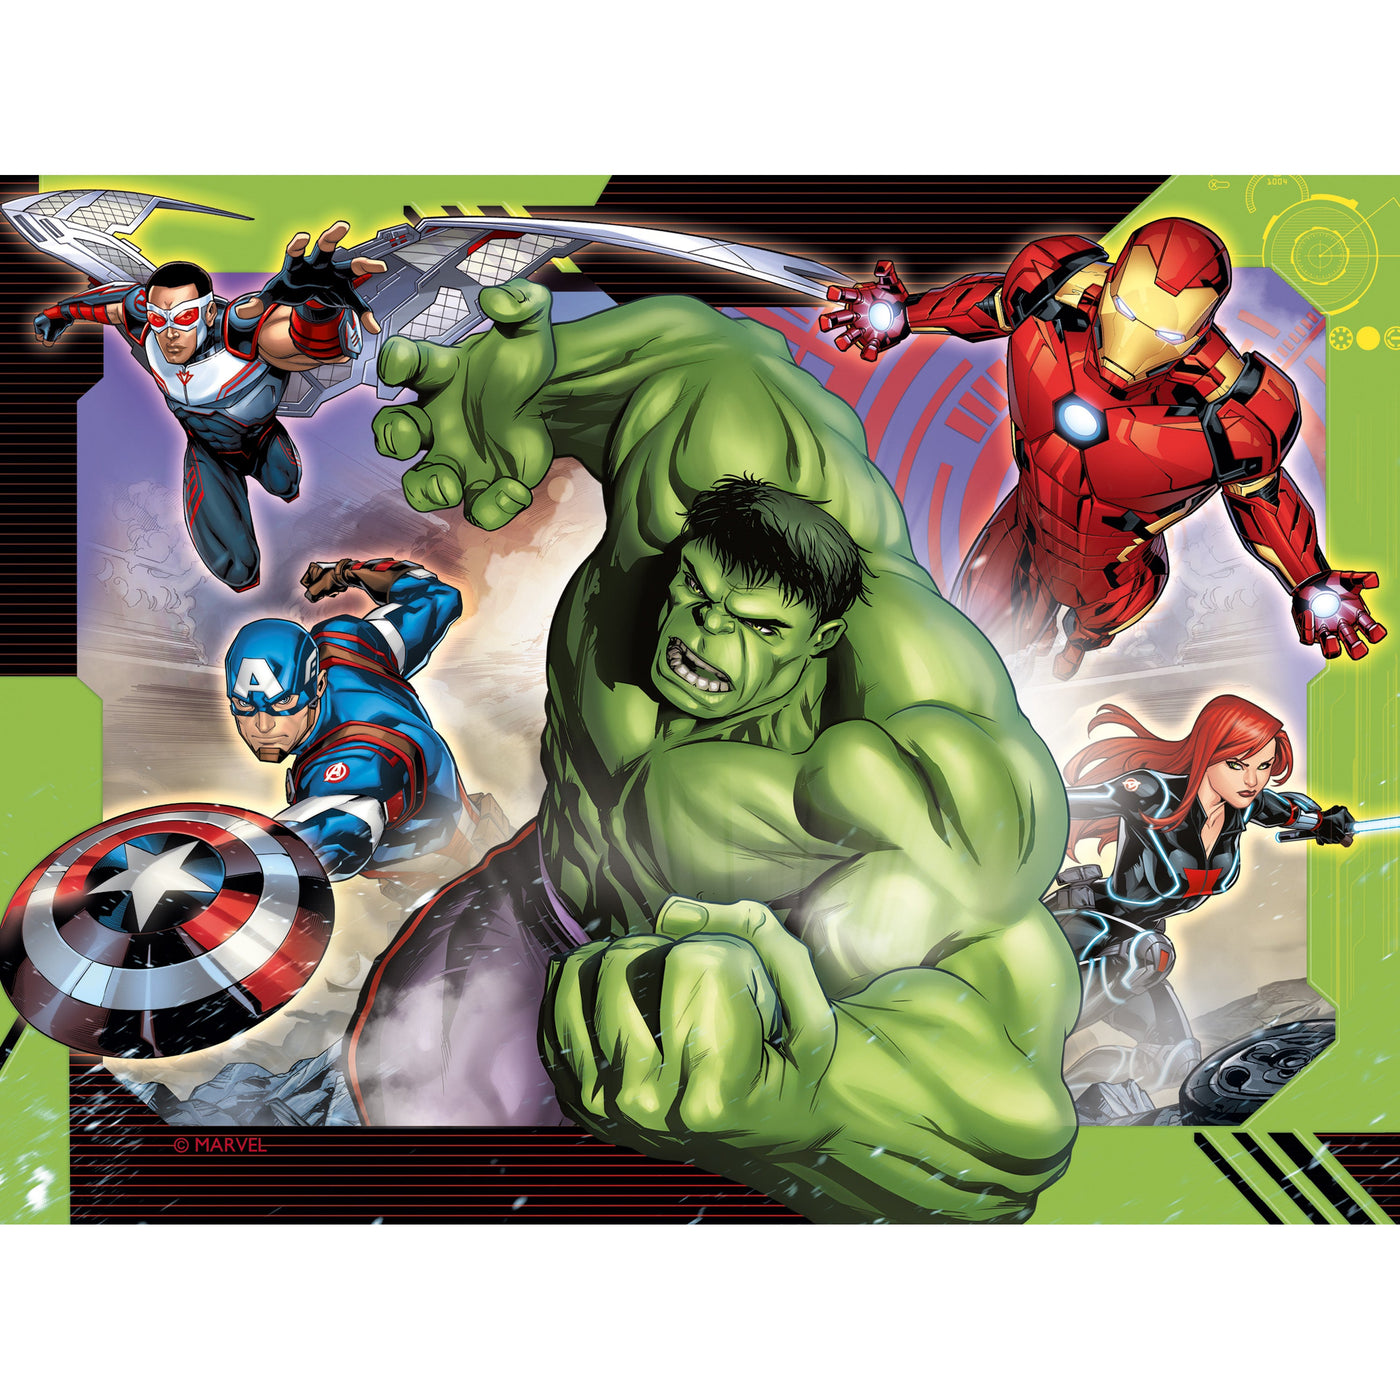 Avengers Assemble 4 in a Box Puzzles